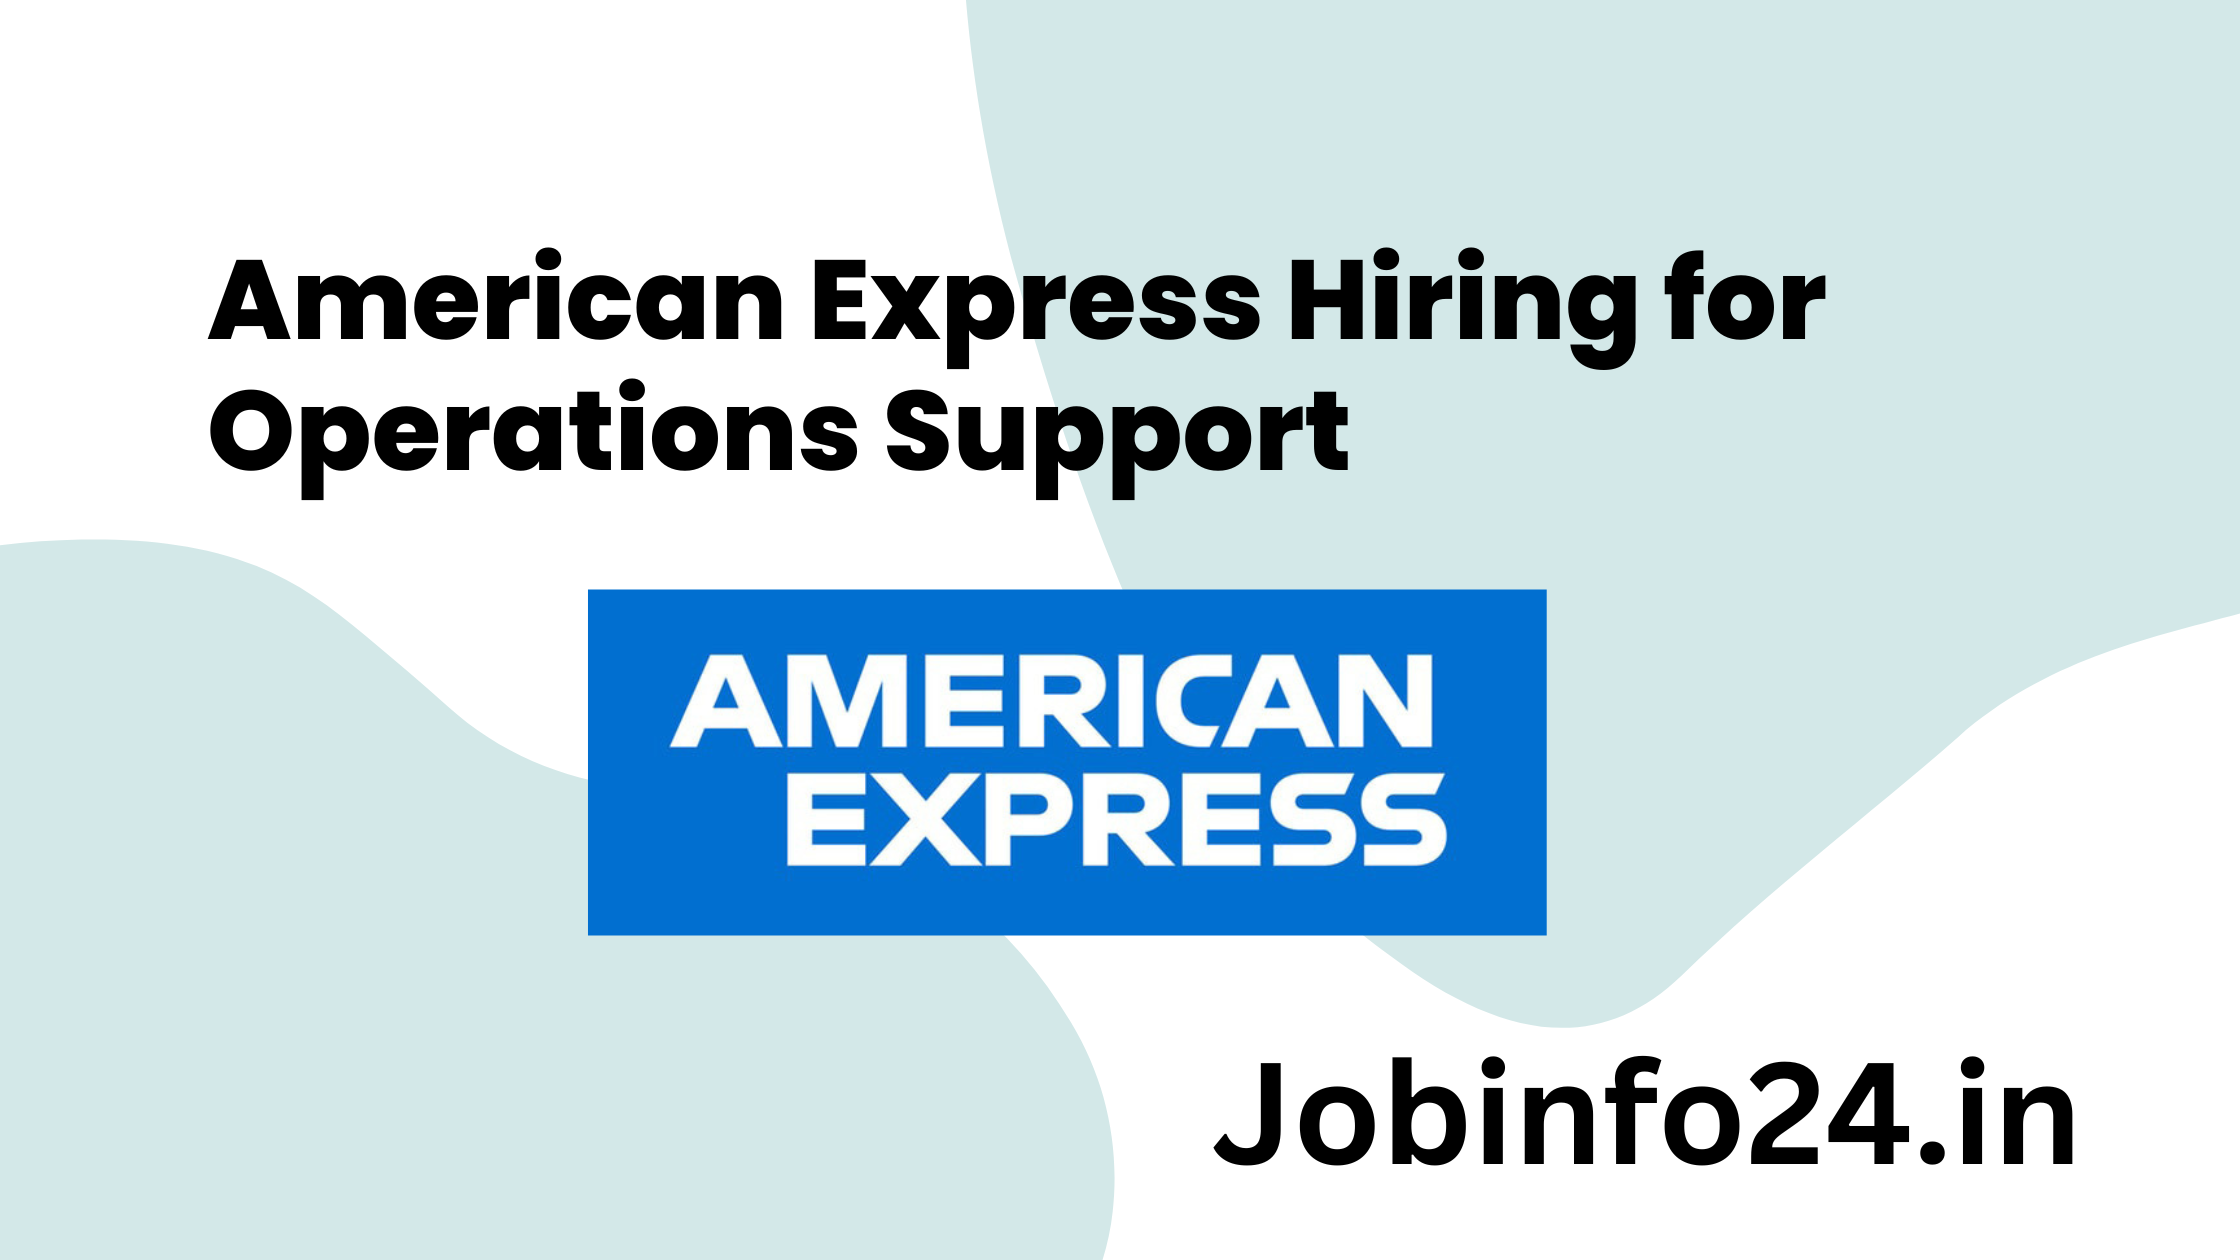 American Express Hiring for Operations Support